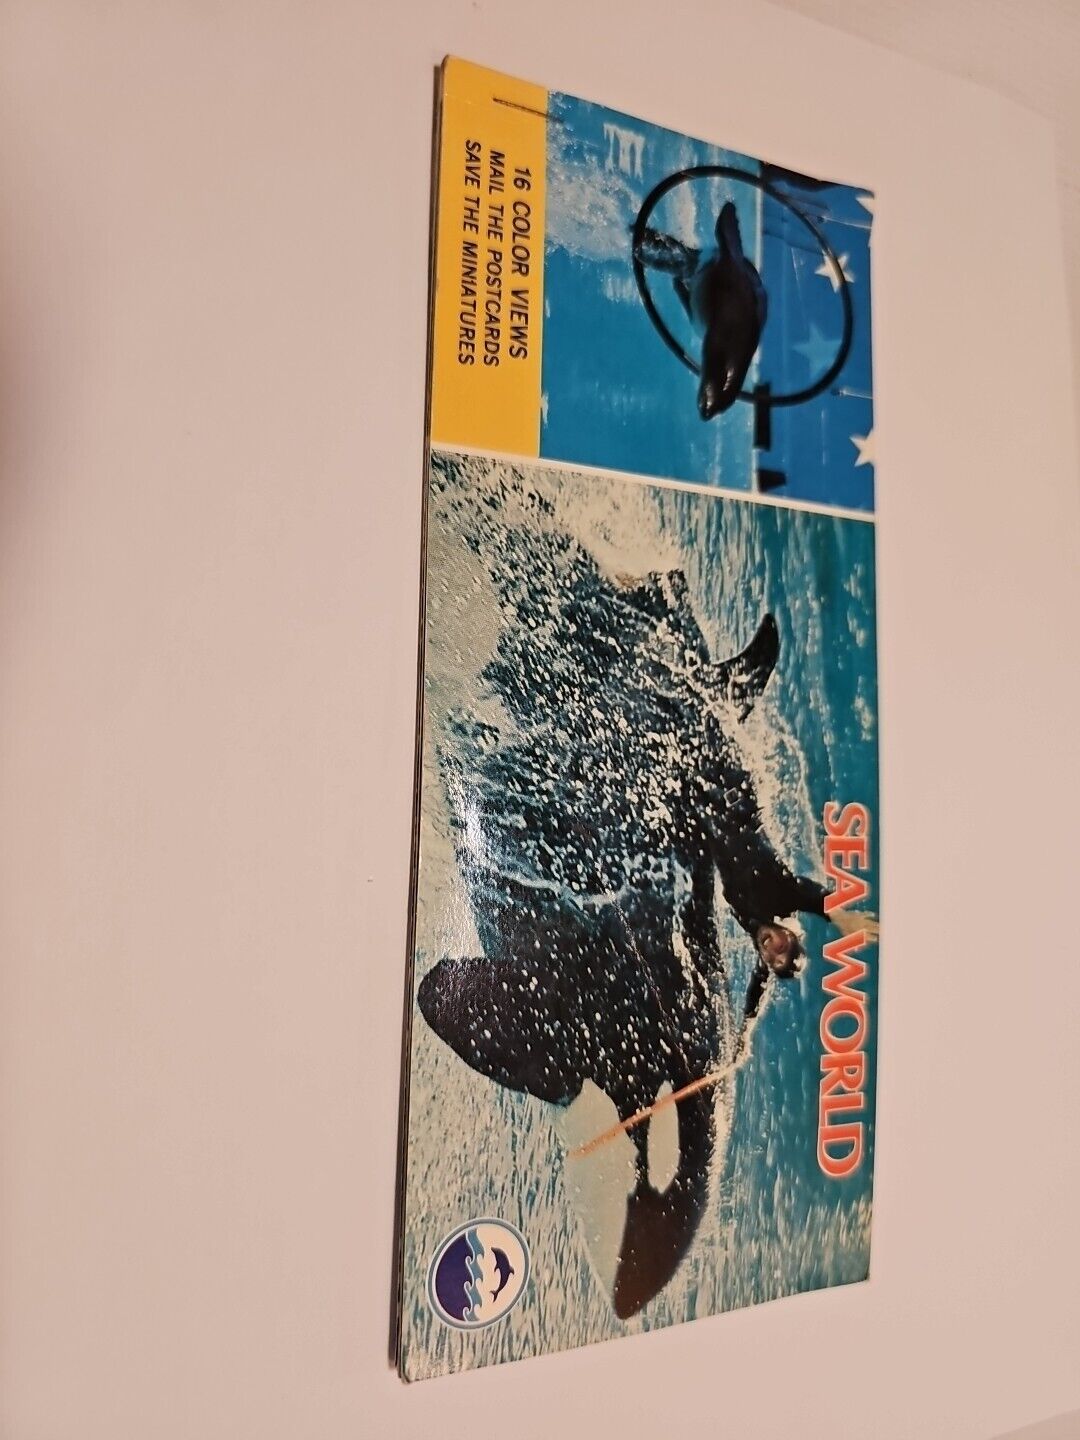 Vintage Sea World Souvenir Postcard Book with Miniatures to Save.  Complete.